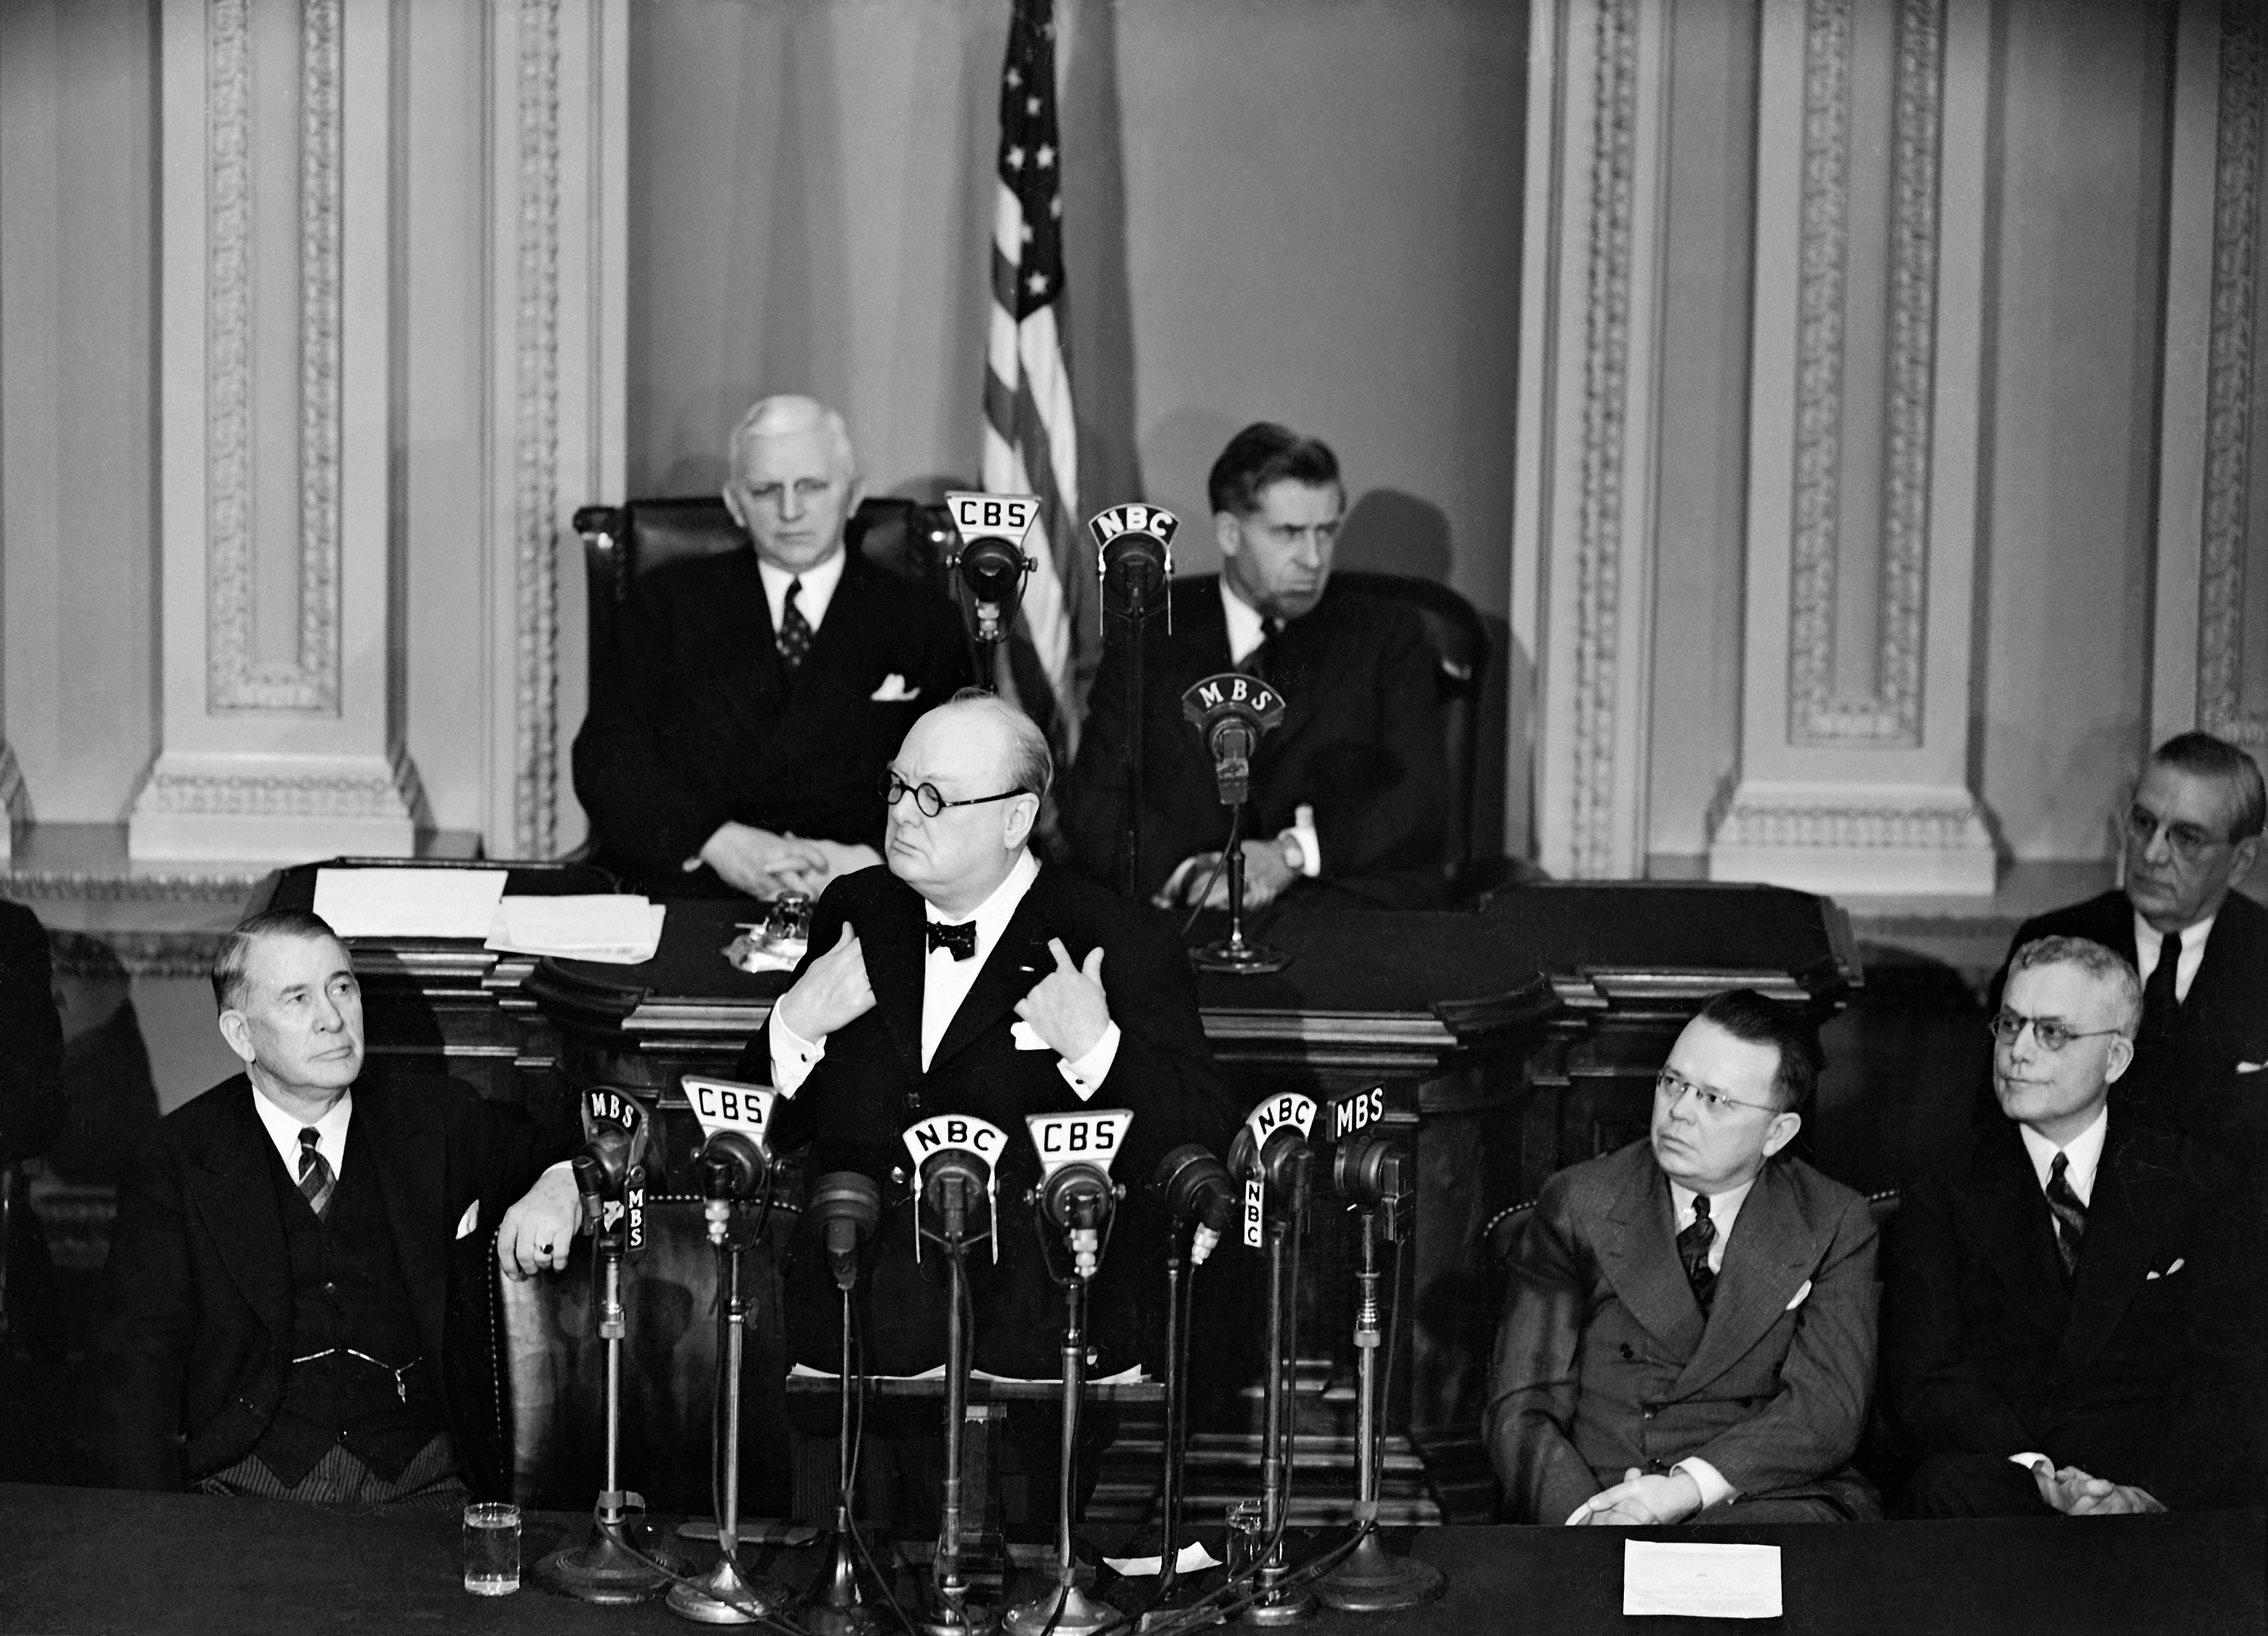 Image result for winston churchill addresses joint session of u.s. congress in 1941